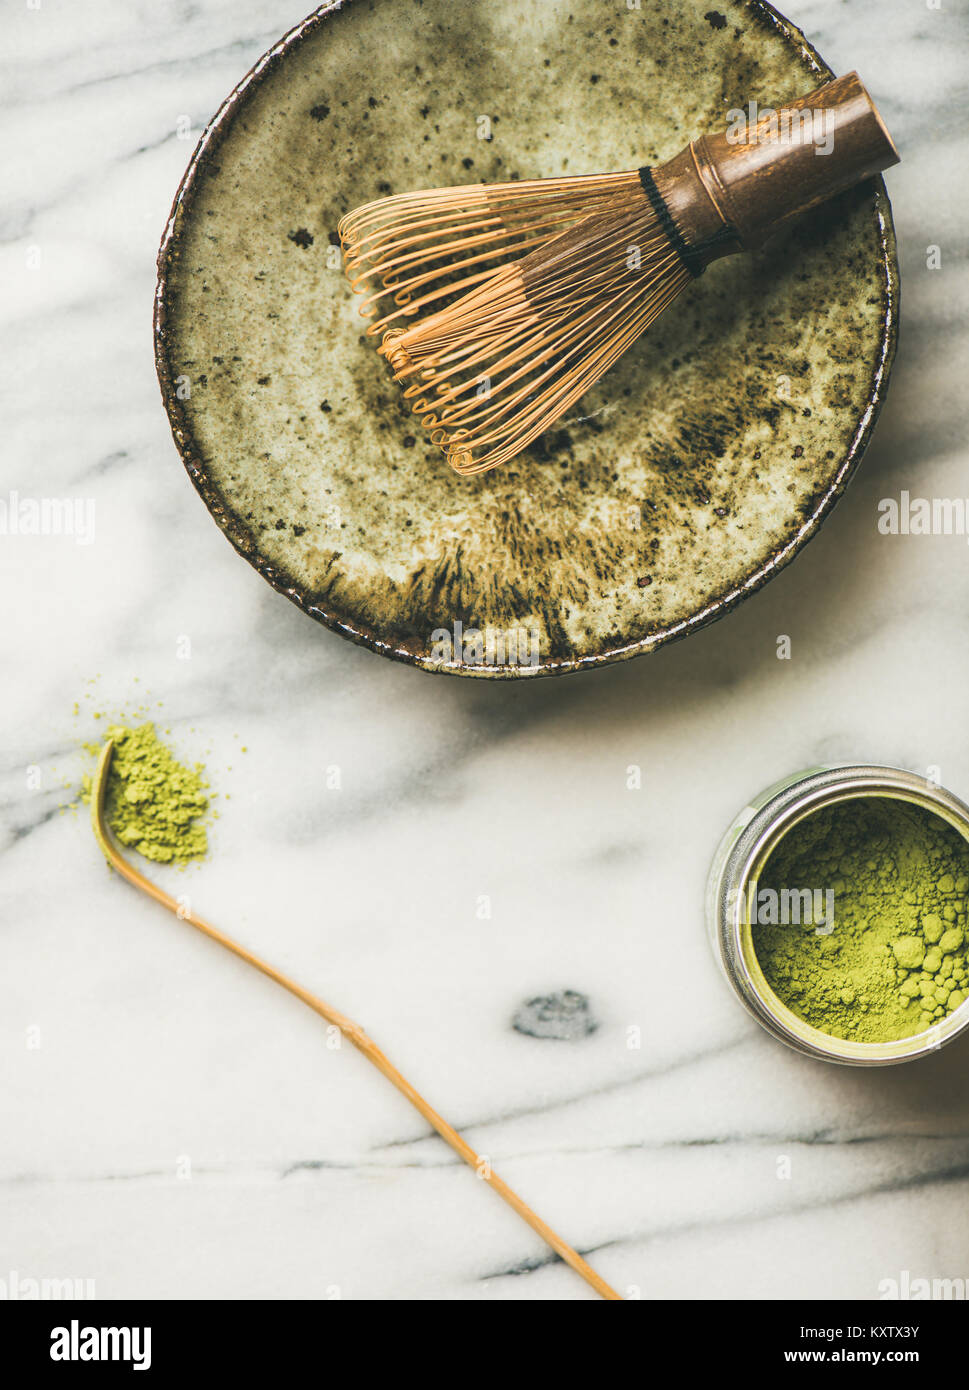 https://c8.alamy.com/comp/KXTX3Y/japanese-tools-and-bowls-for-brewing-matcha-tea-copy-space-KXTX3Y.jpg